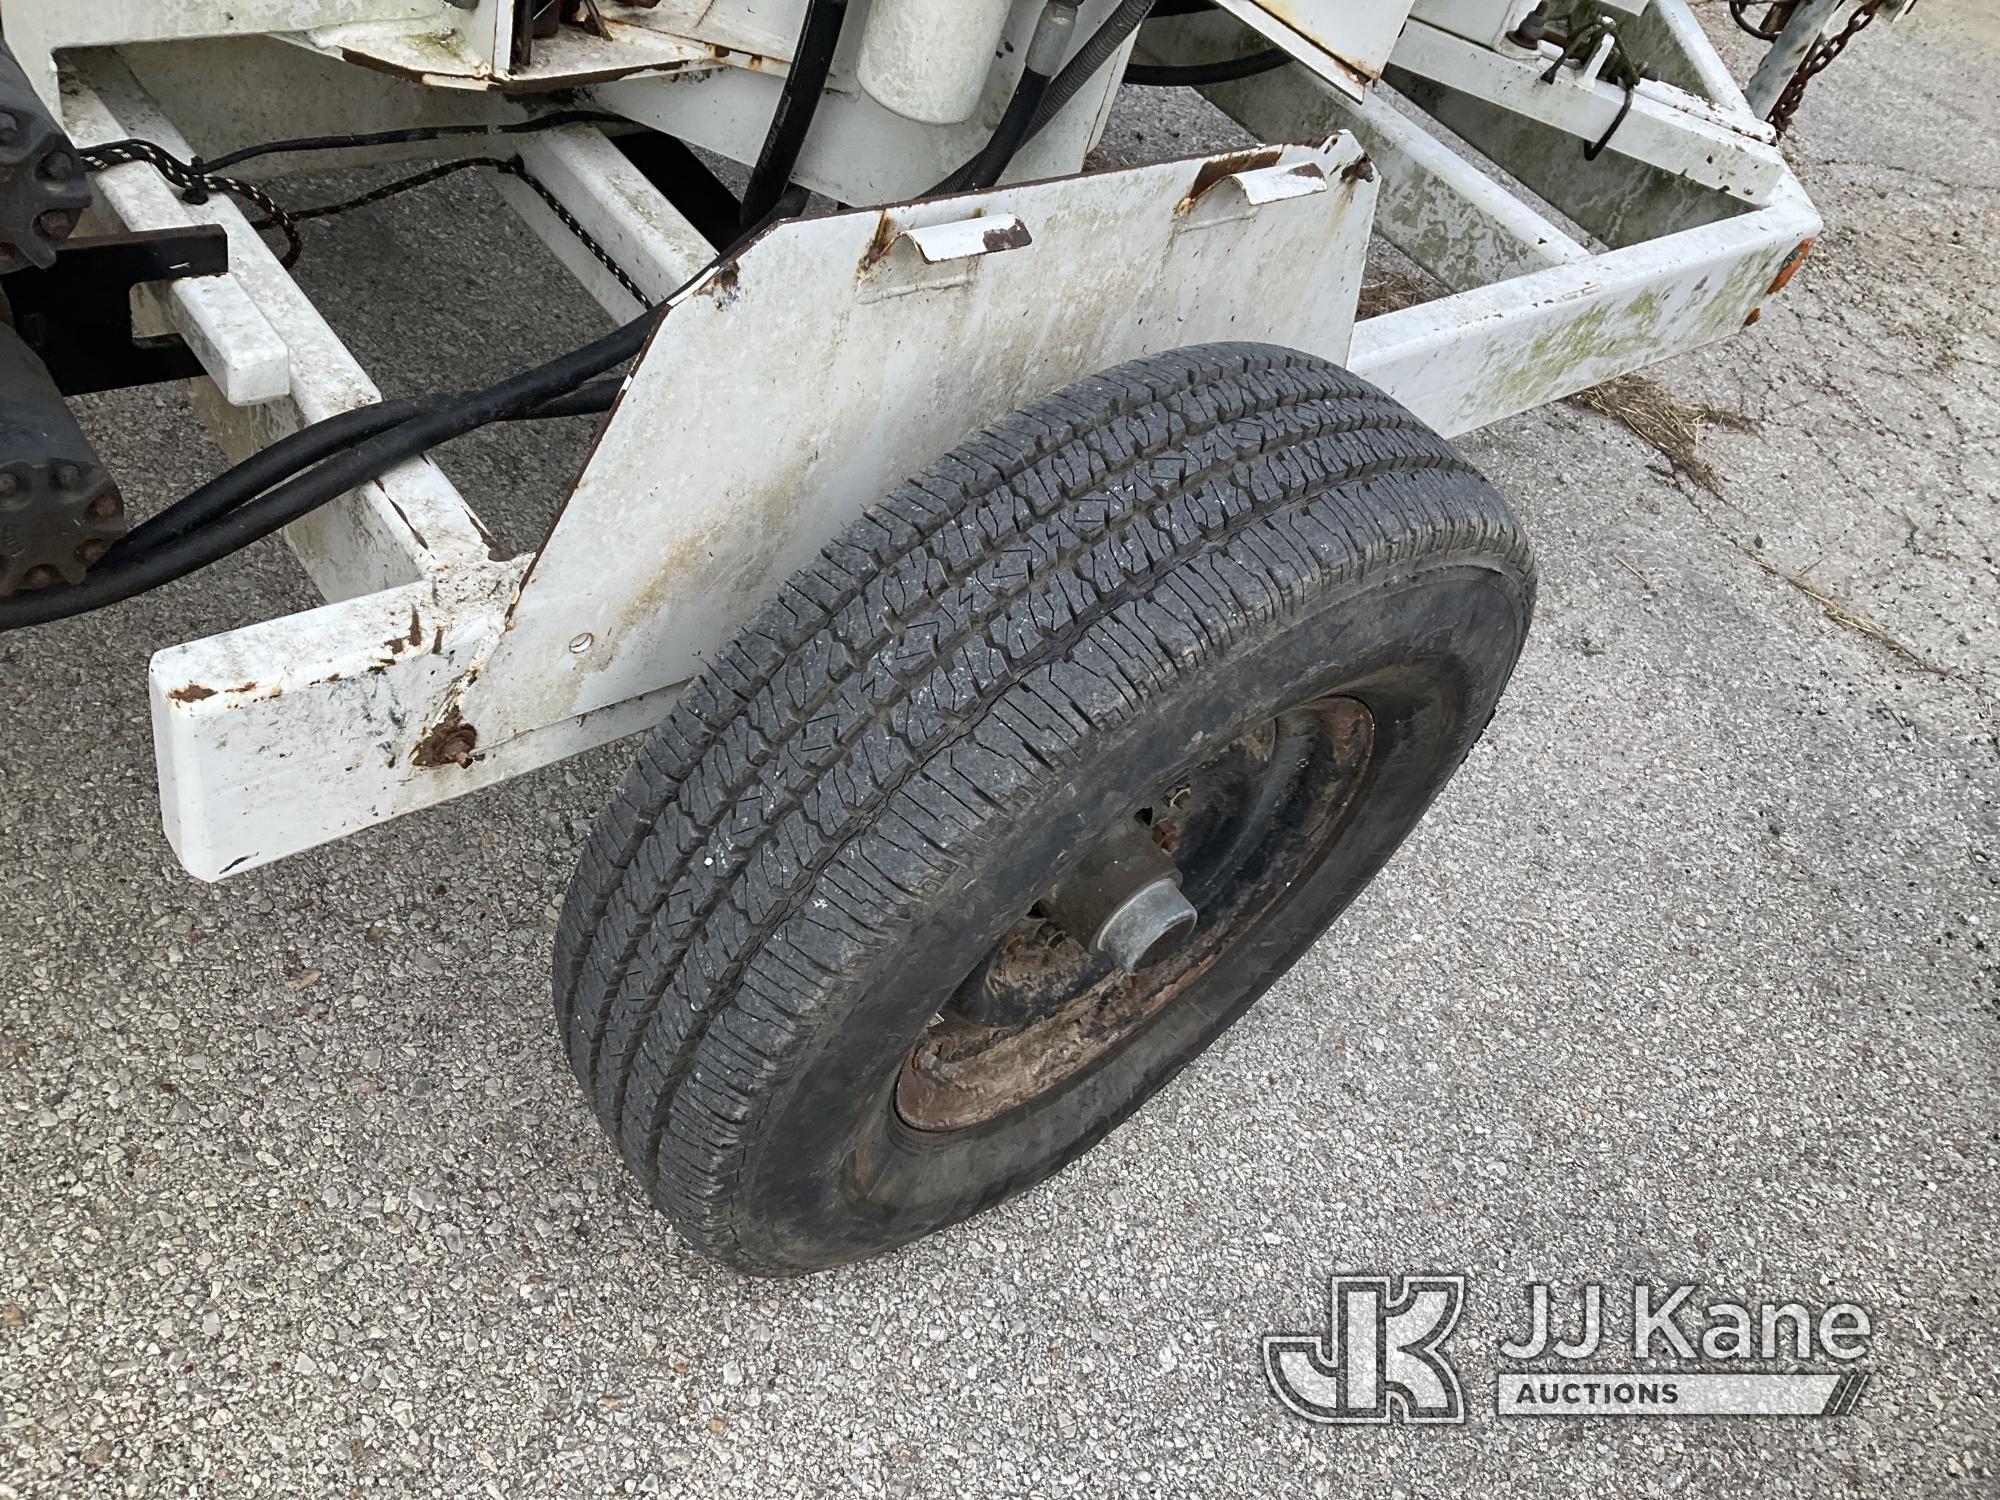 (Kansas City, MO) 2007 Altec DC1217 Chipper (12in Disc) Not Running, Condition Unknown